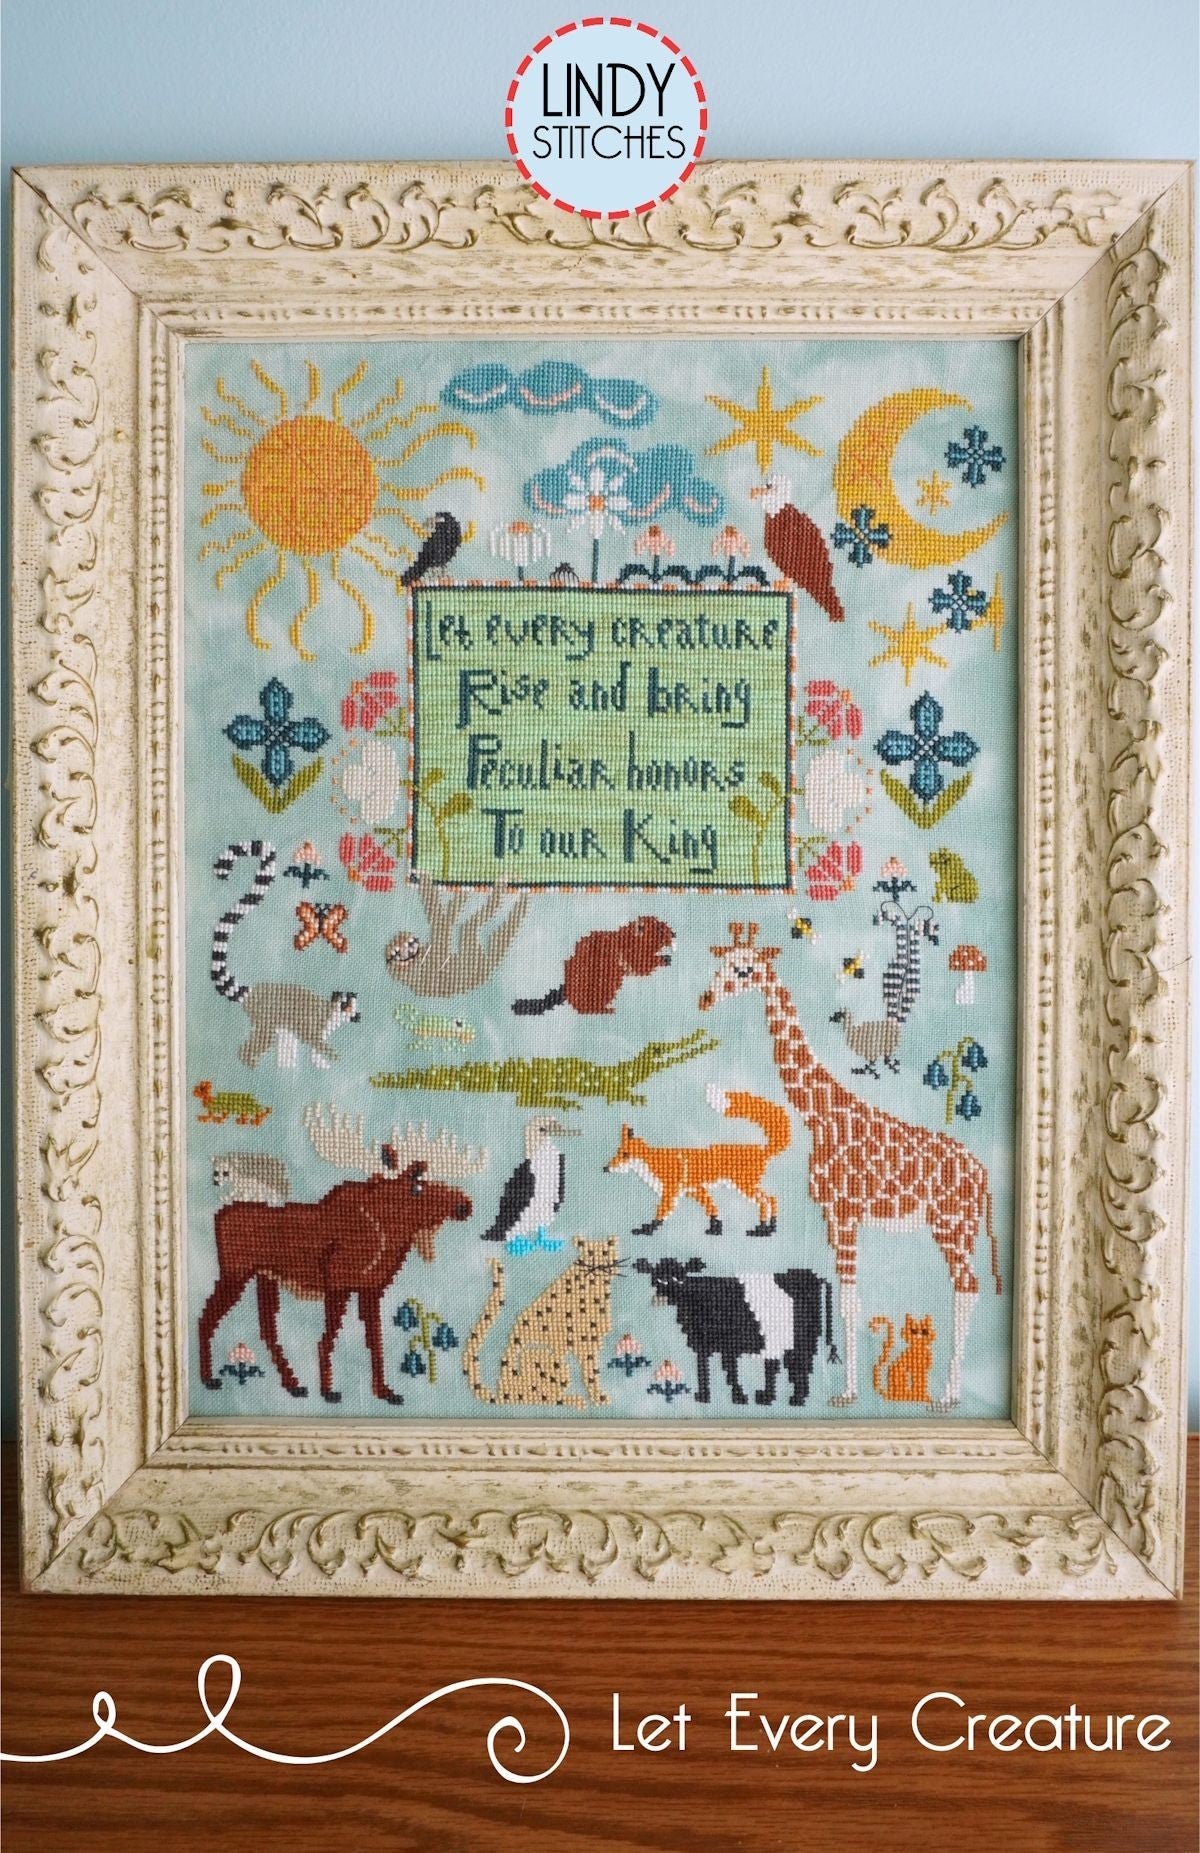 Let Every Creature - Cross Stitch Chart by Lindy Stitches PREORDER